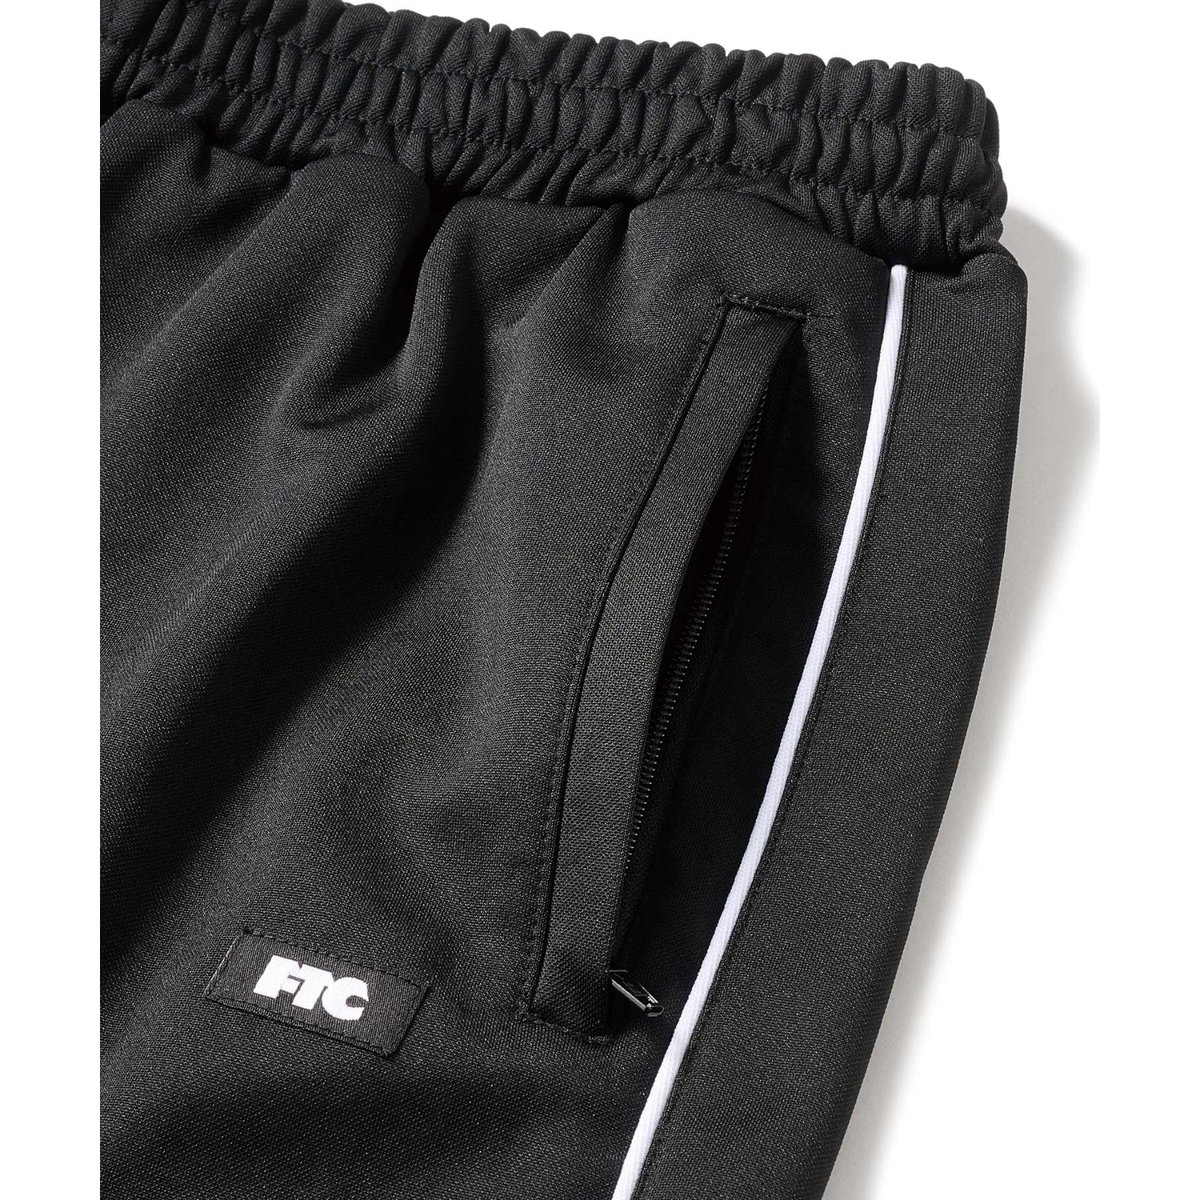 FTC | PIPING TRACK JERSEY PANT 